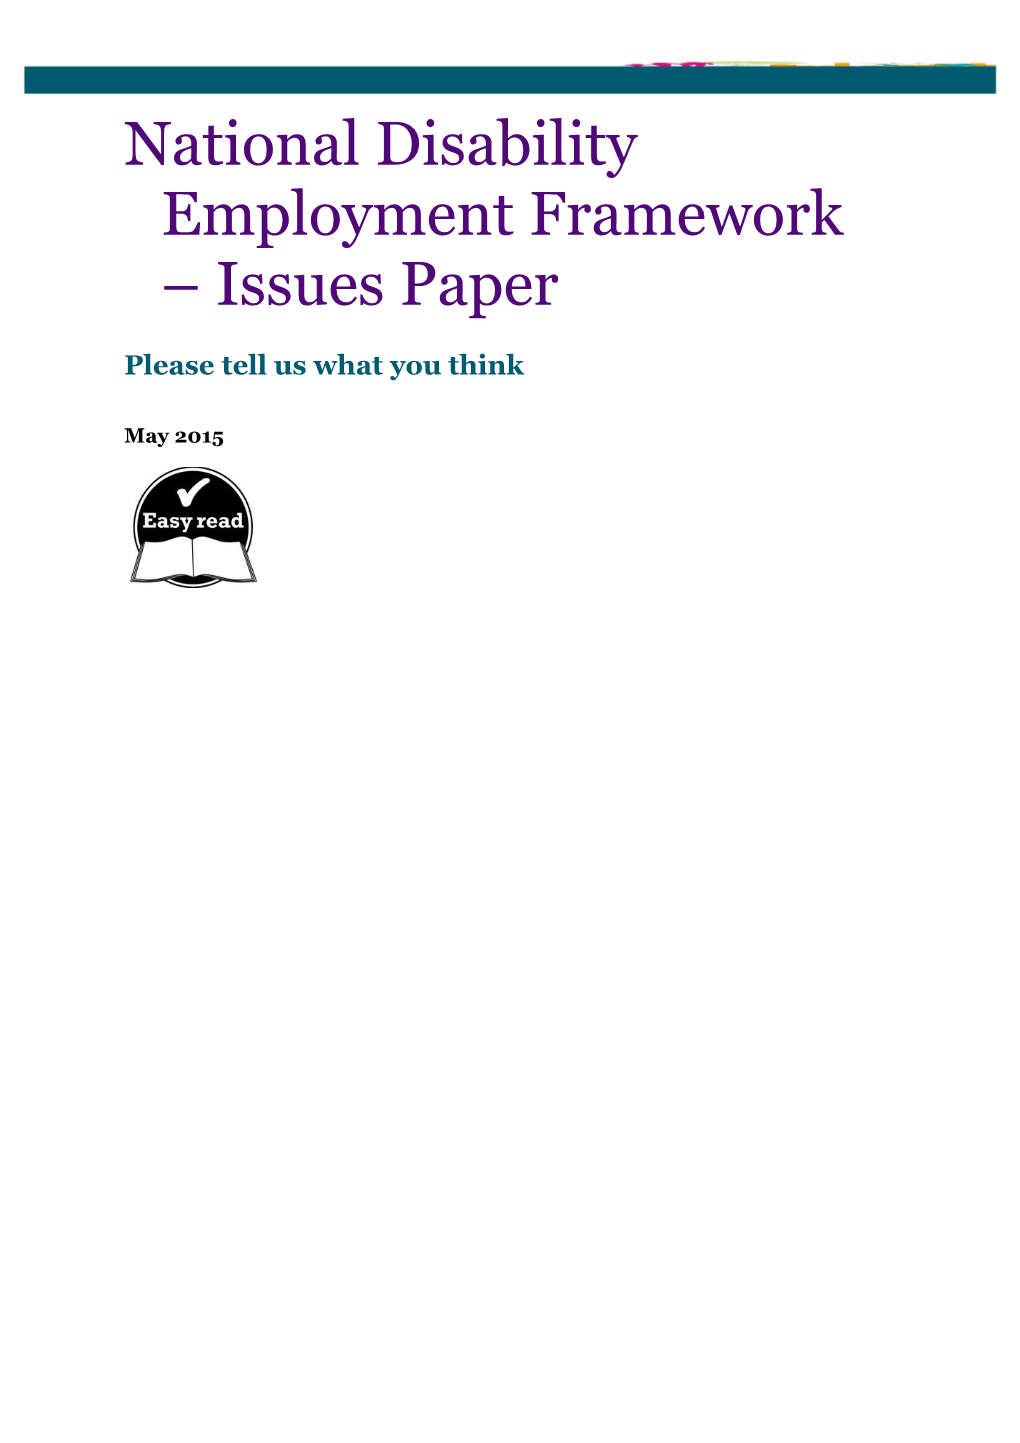 National Disability Employment Framework Issues Paper